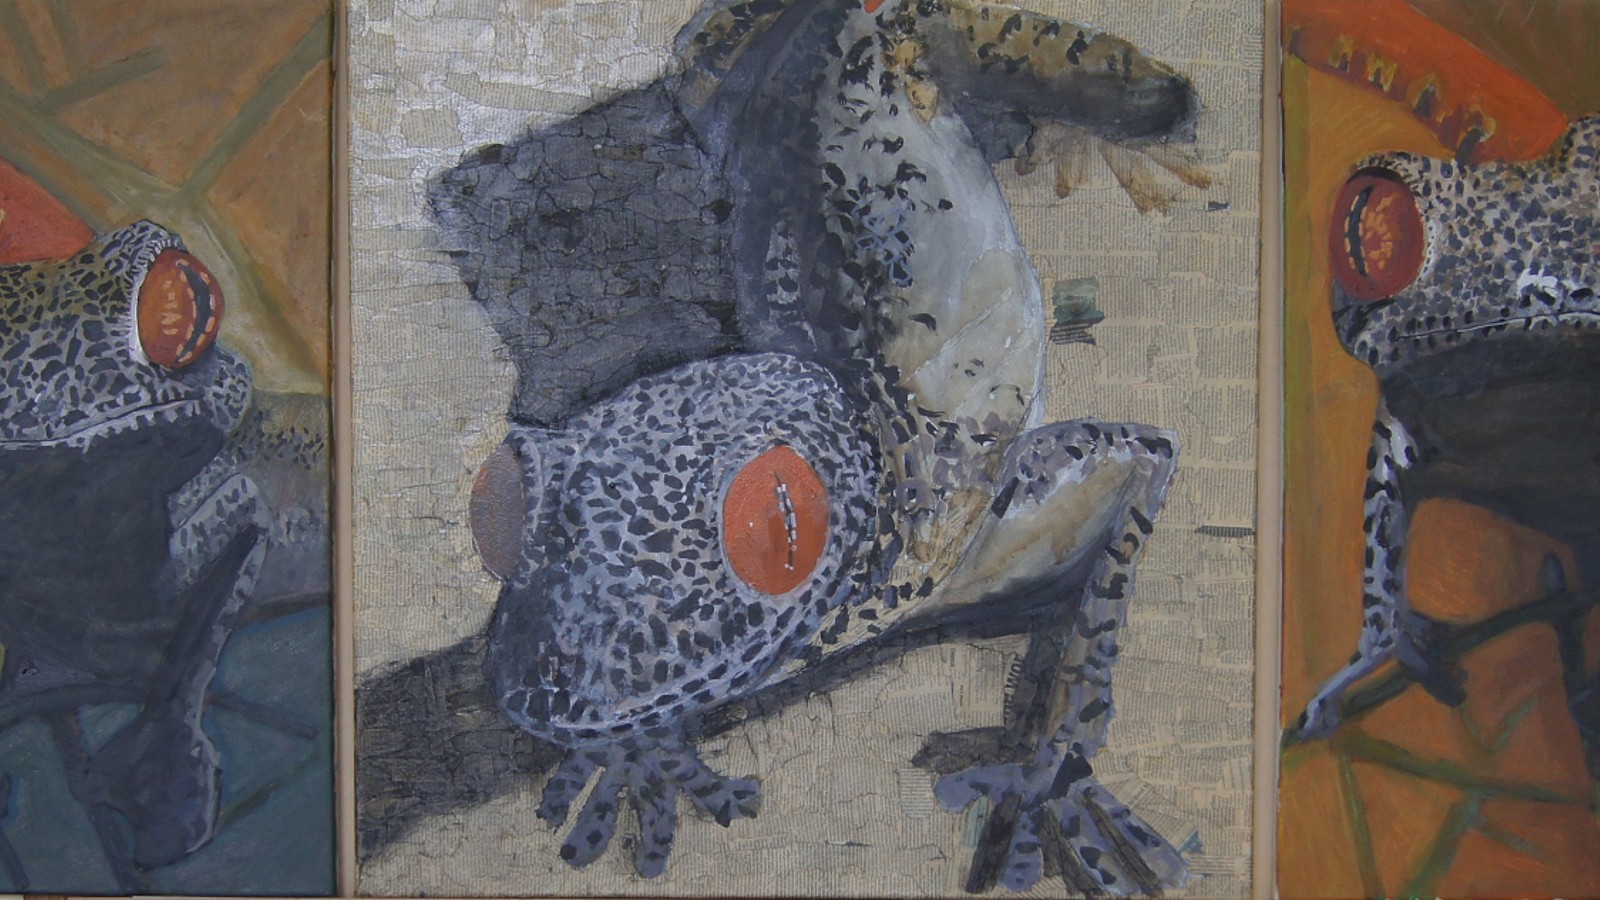 Image Artwork by David Whitfield titled Gecko. 